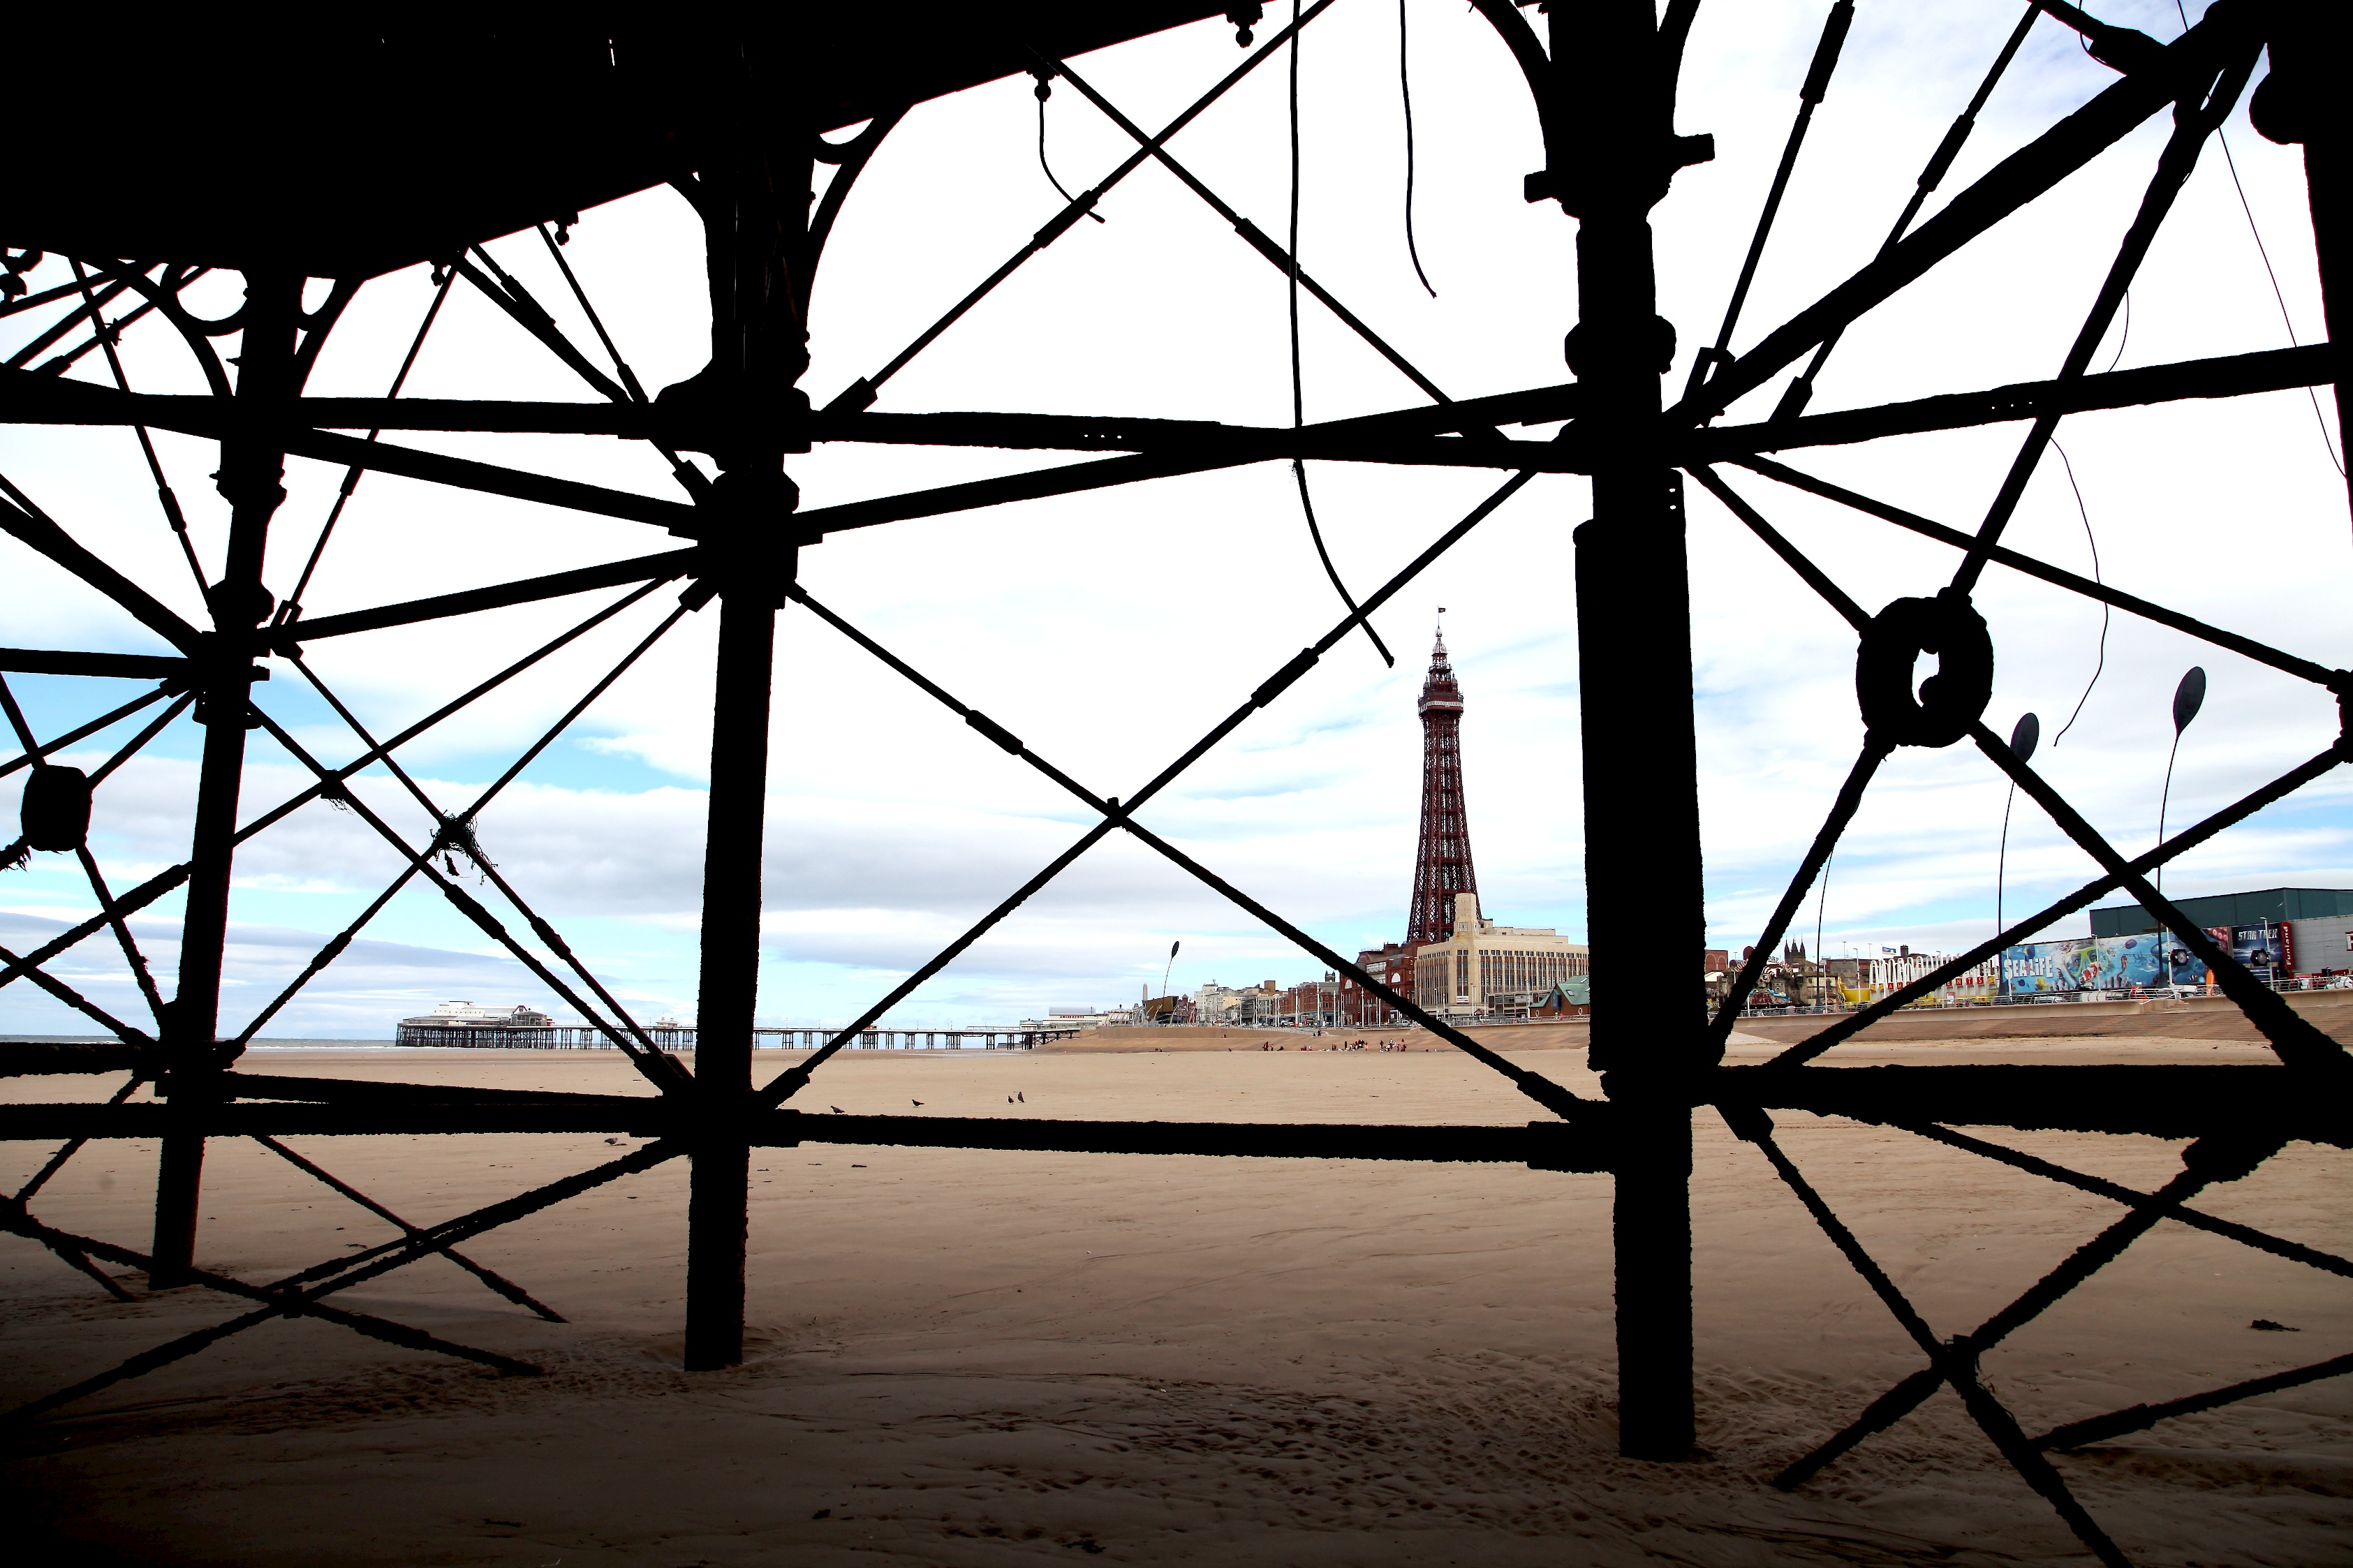 View of the Blackpool Tower from the beach